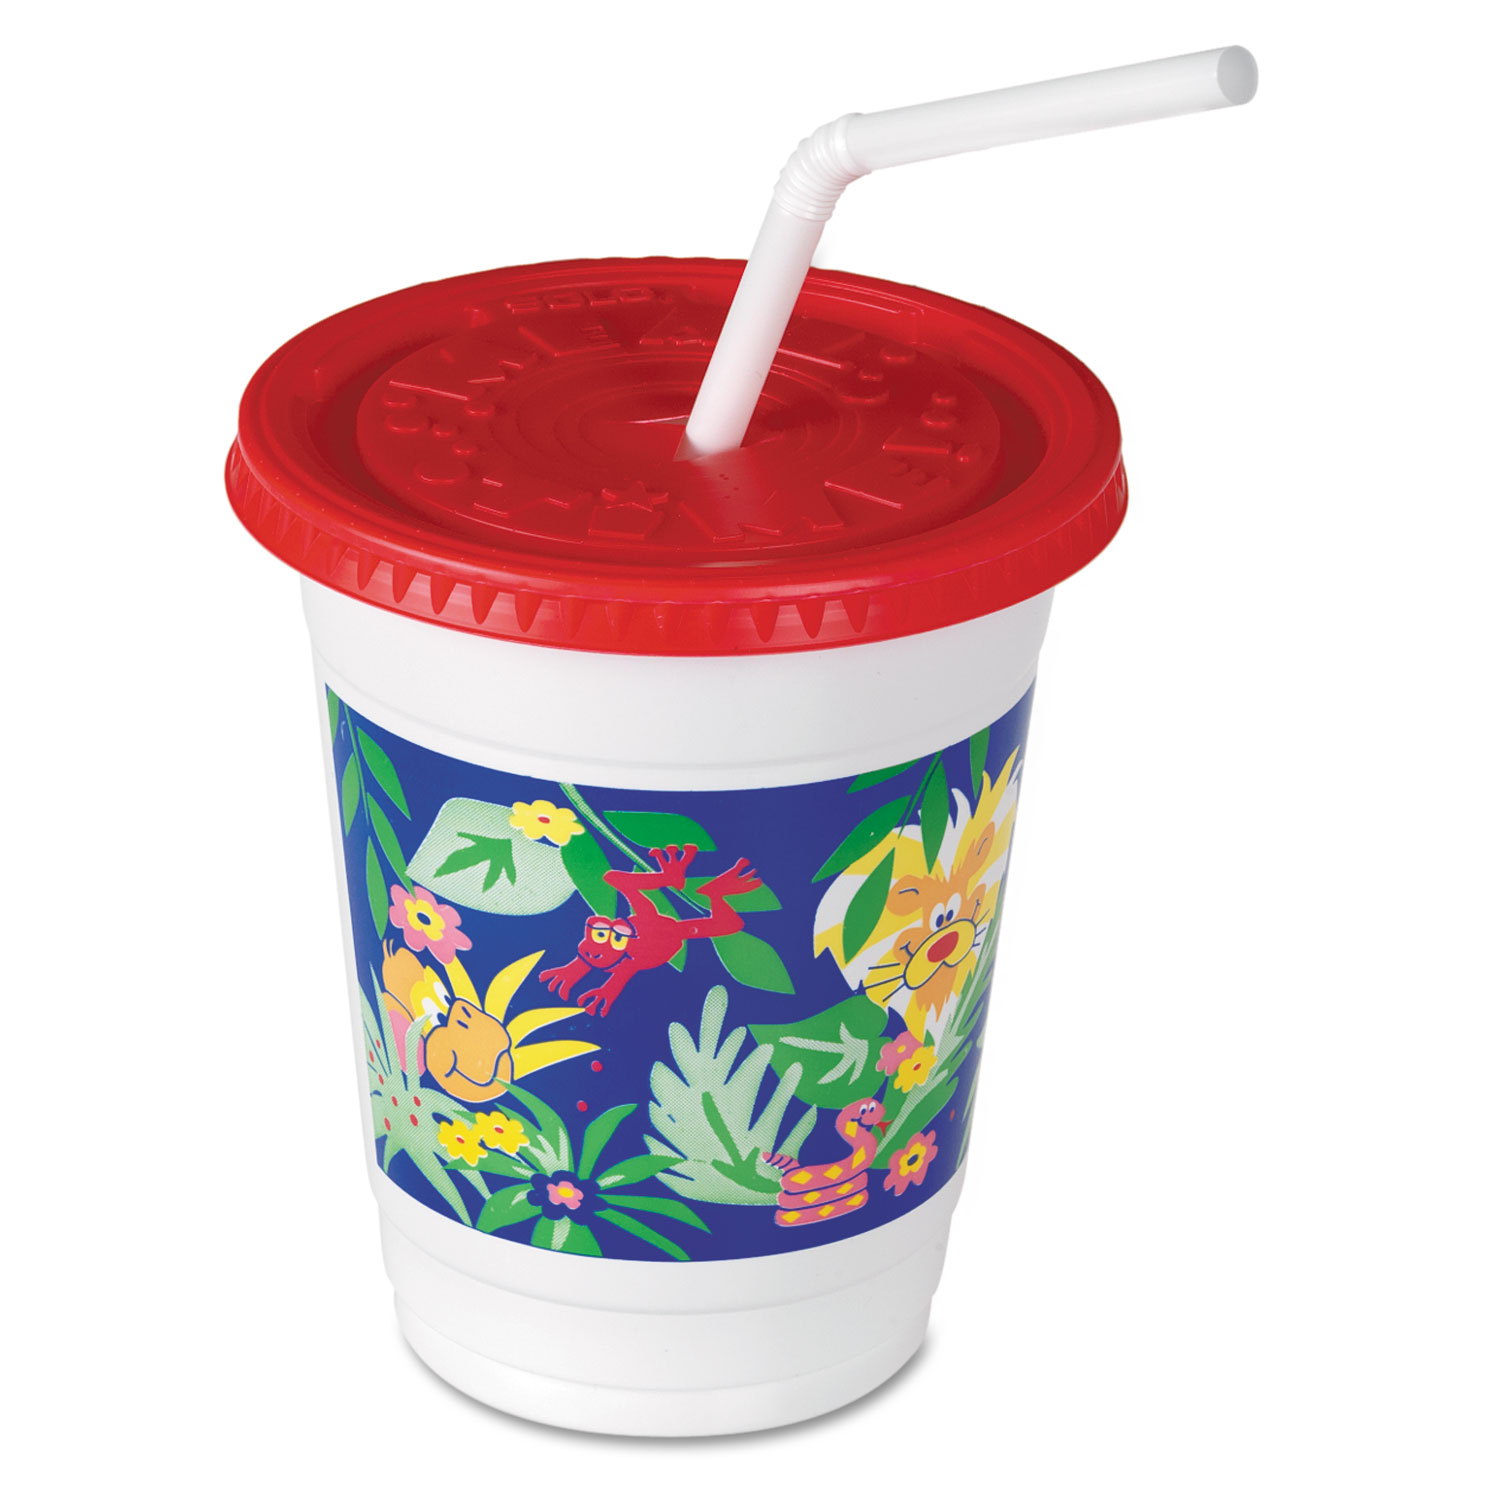 Kids cup. Kids Cups. Cup with Lid picture for Kids. Children's Cup. Kids Cup Desk.